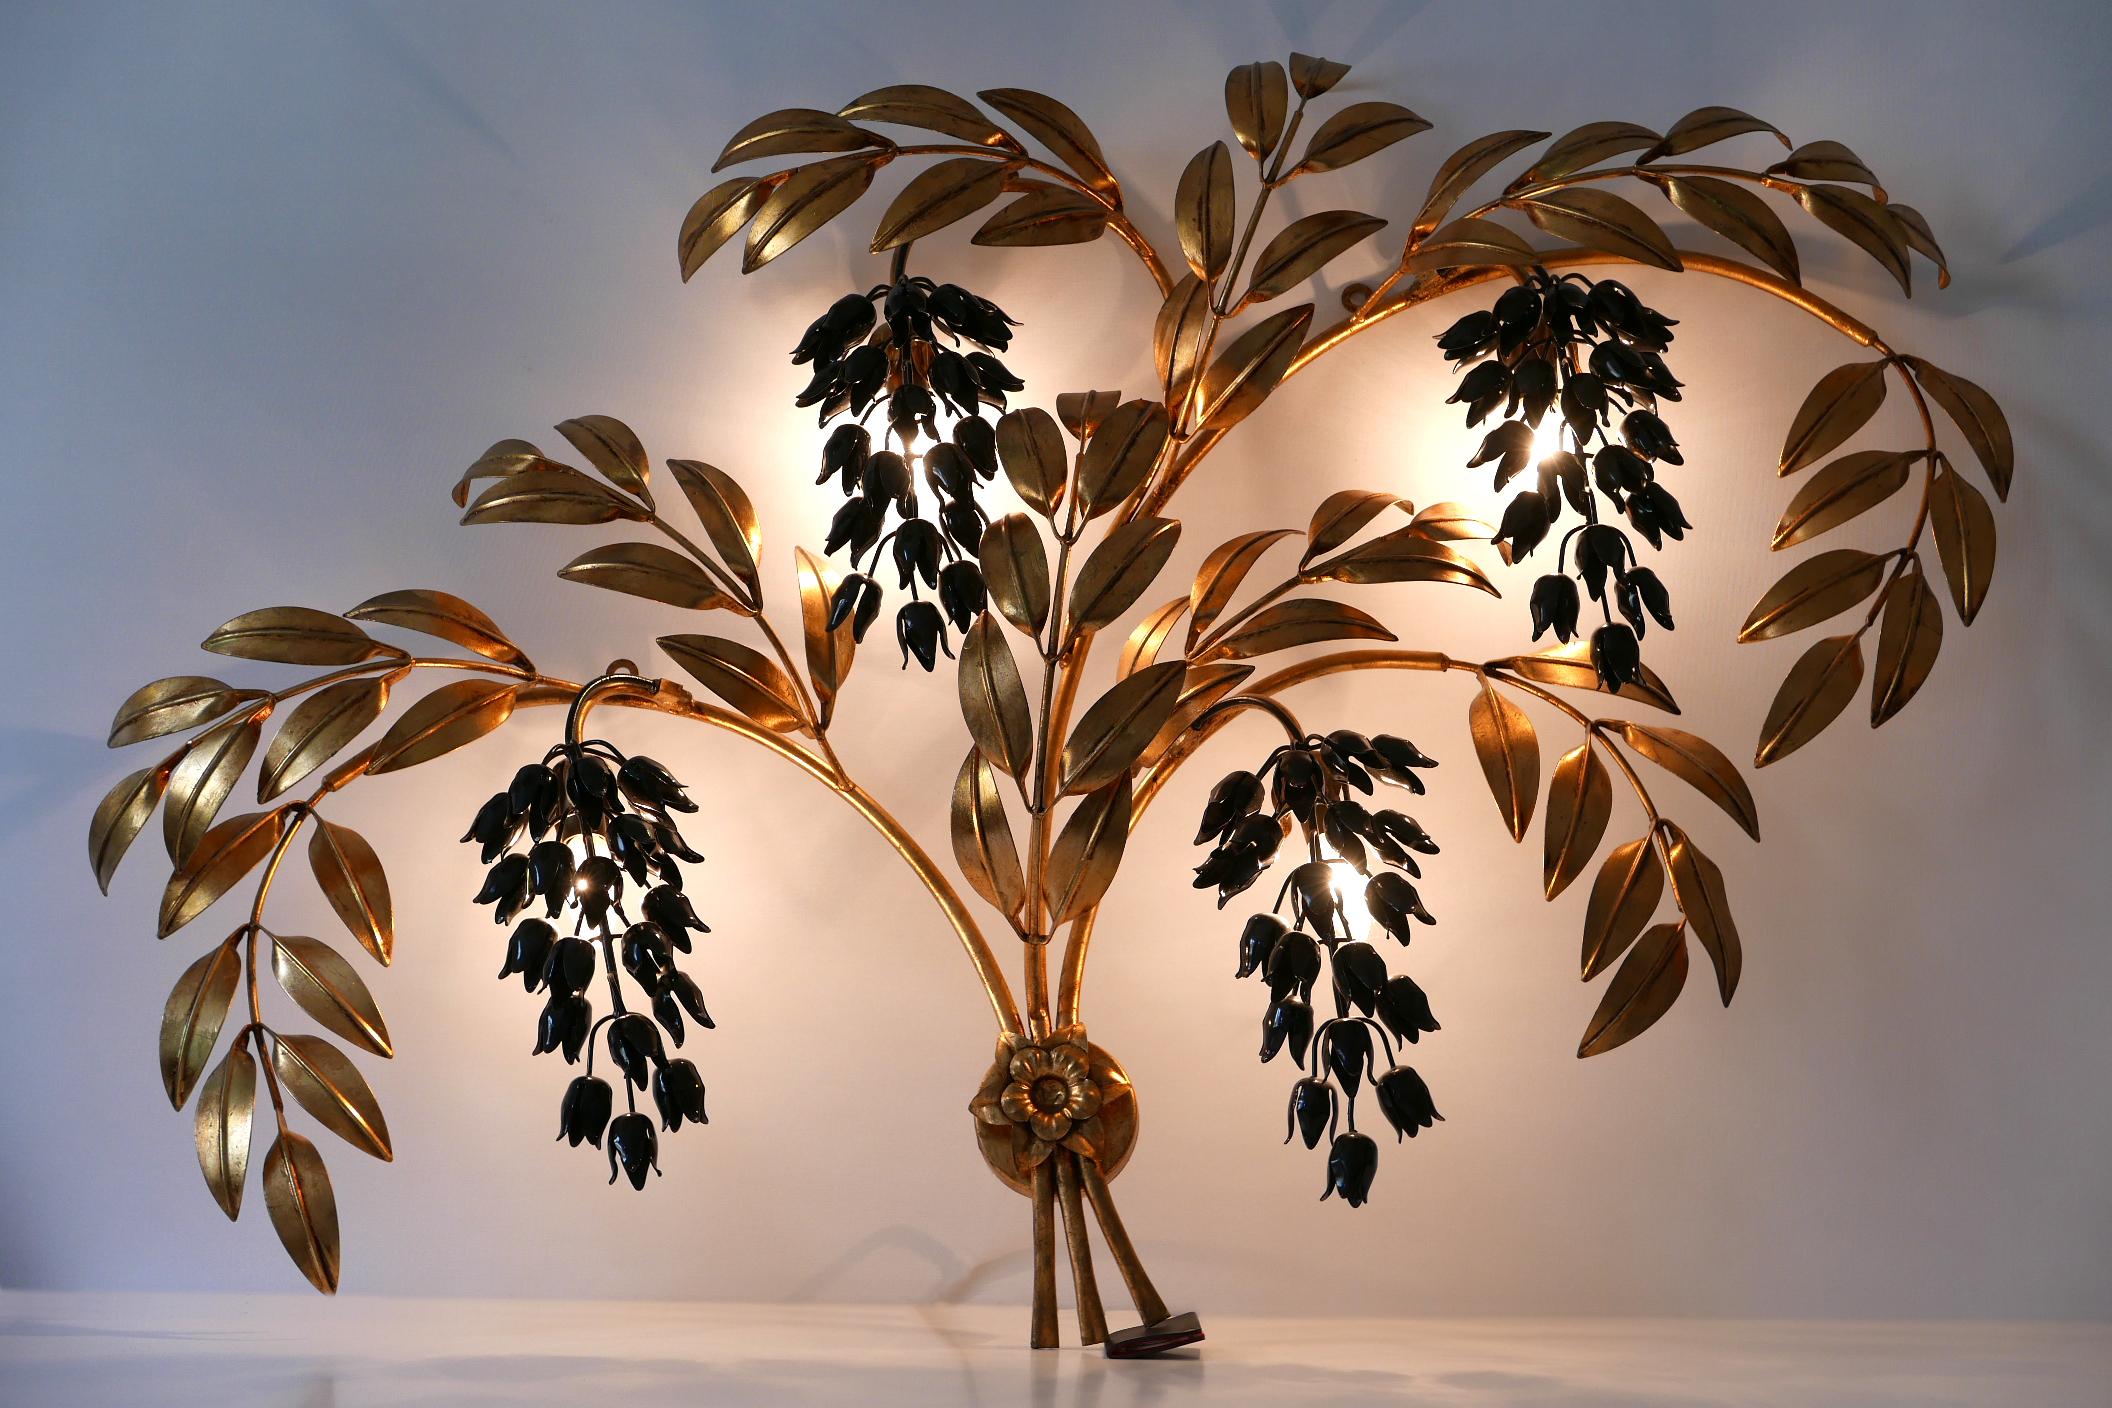 Monumental, four-flamed Mid-Century Modern Pioggia d'Oro wall lamp or sconce. Designed and manufactured by Hans Kögl, 1970s, Germany.

Executed in gilt and partly black enameled metal sheet and tubes, the lamp comes with 4 x E14/E12 Edison screw fit